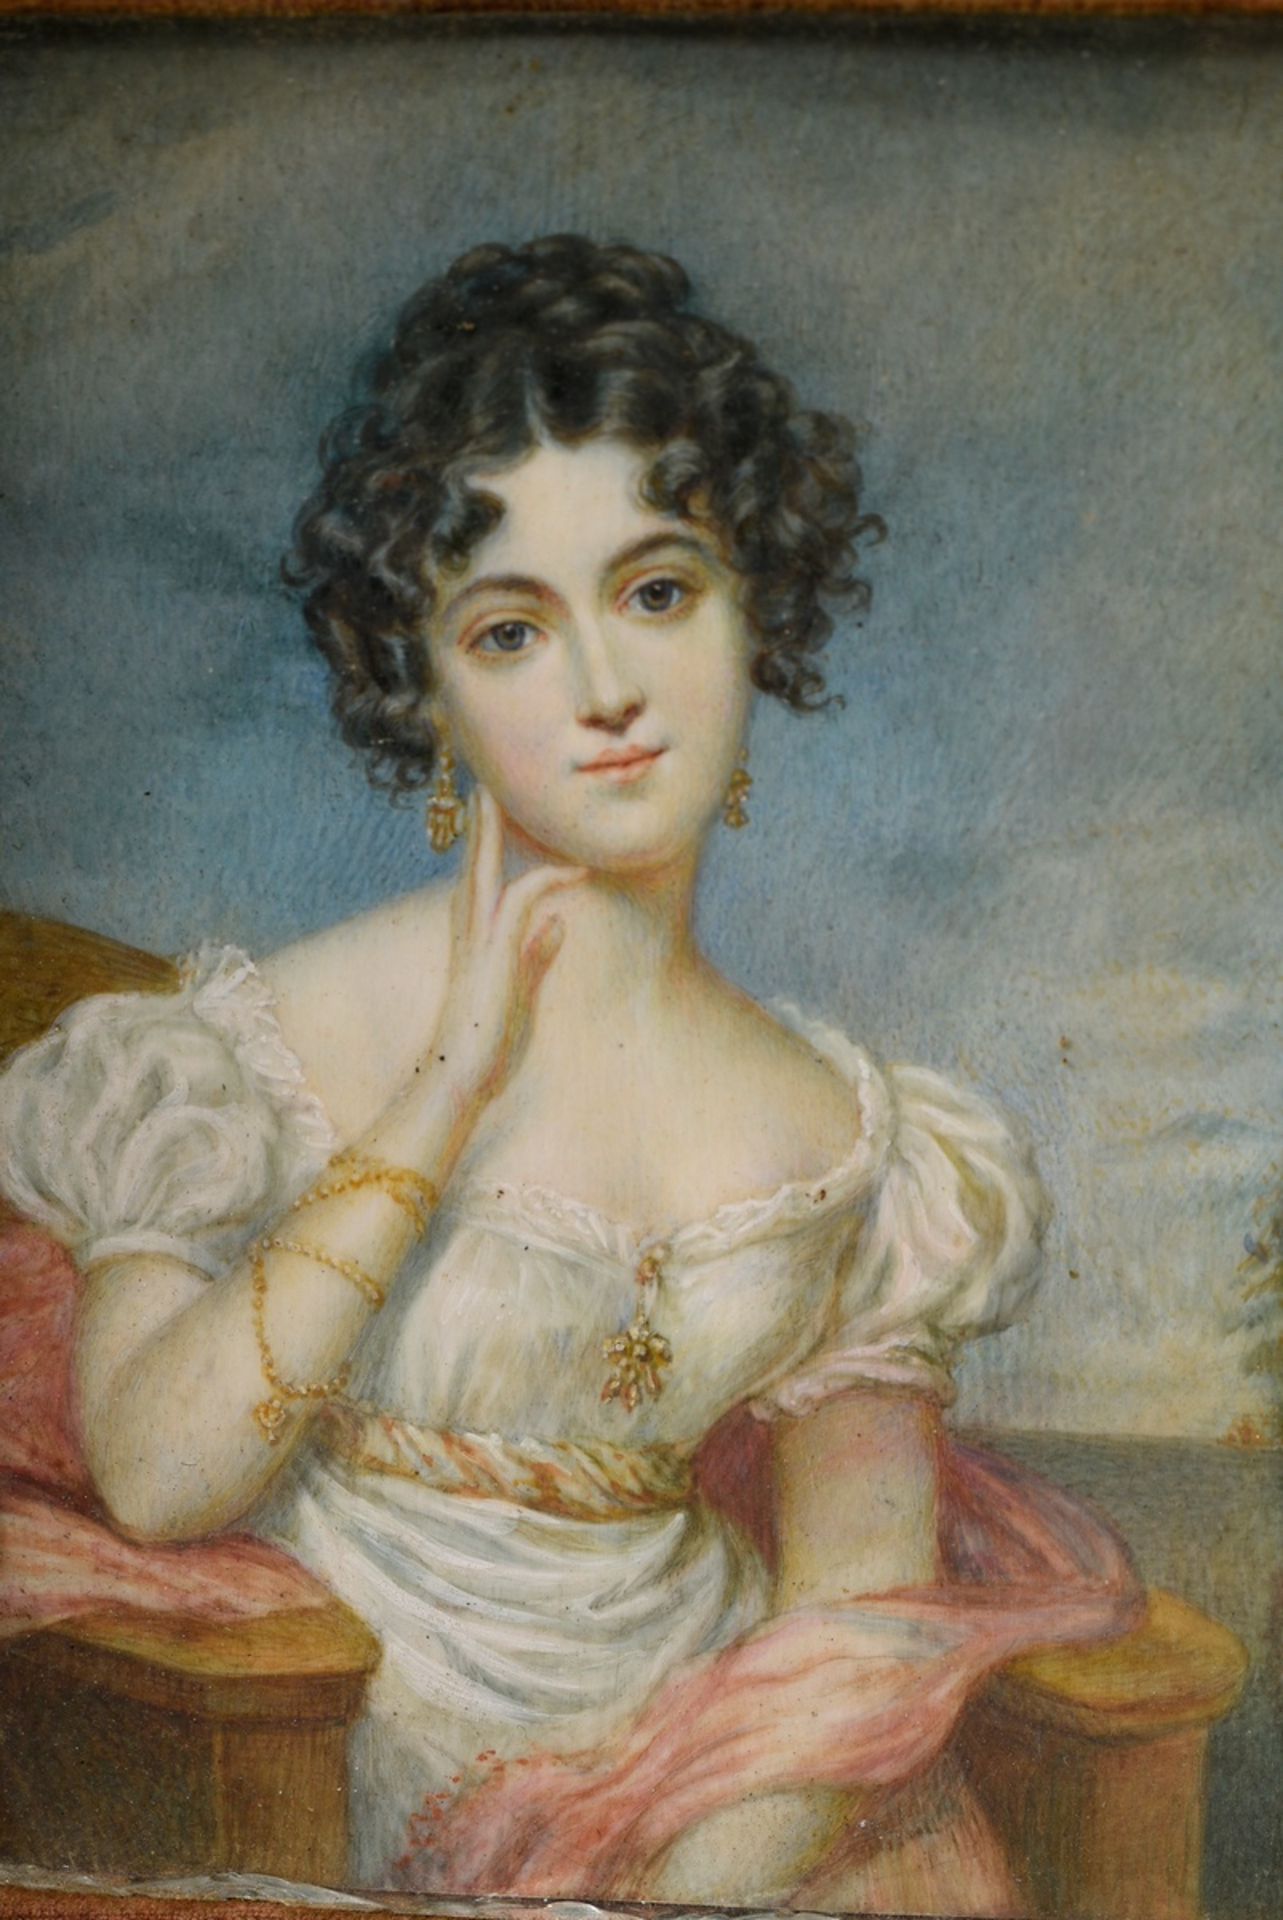 Fine miniature "Young woman in white empire dress with gold jewellery", early 19th century, gouache - Image 2 of 6